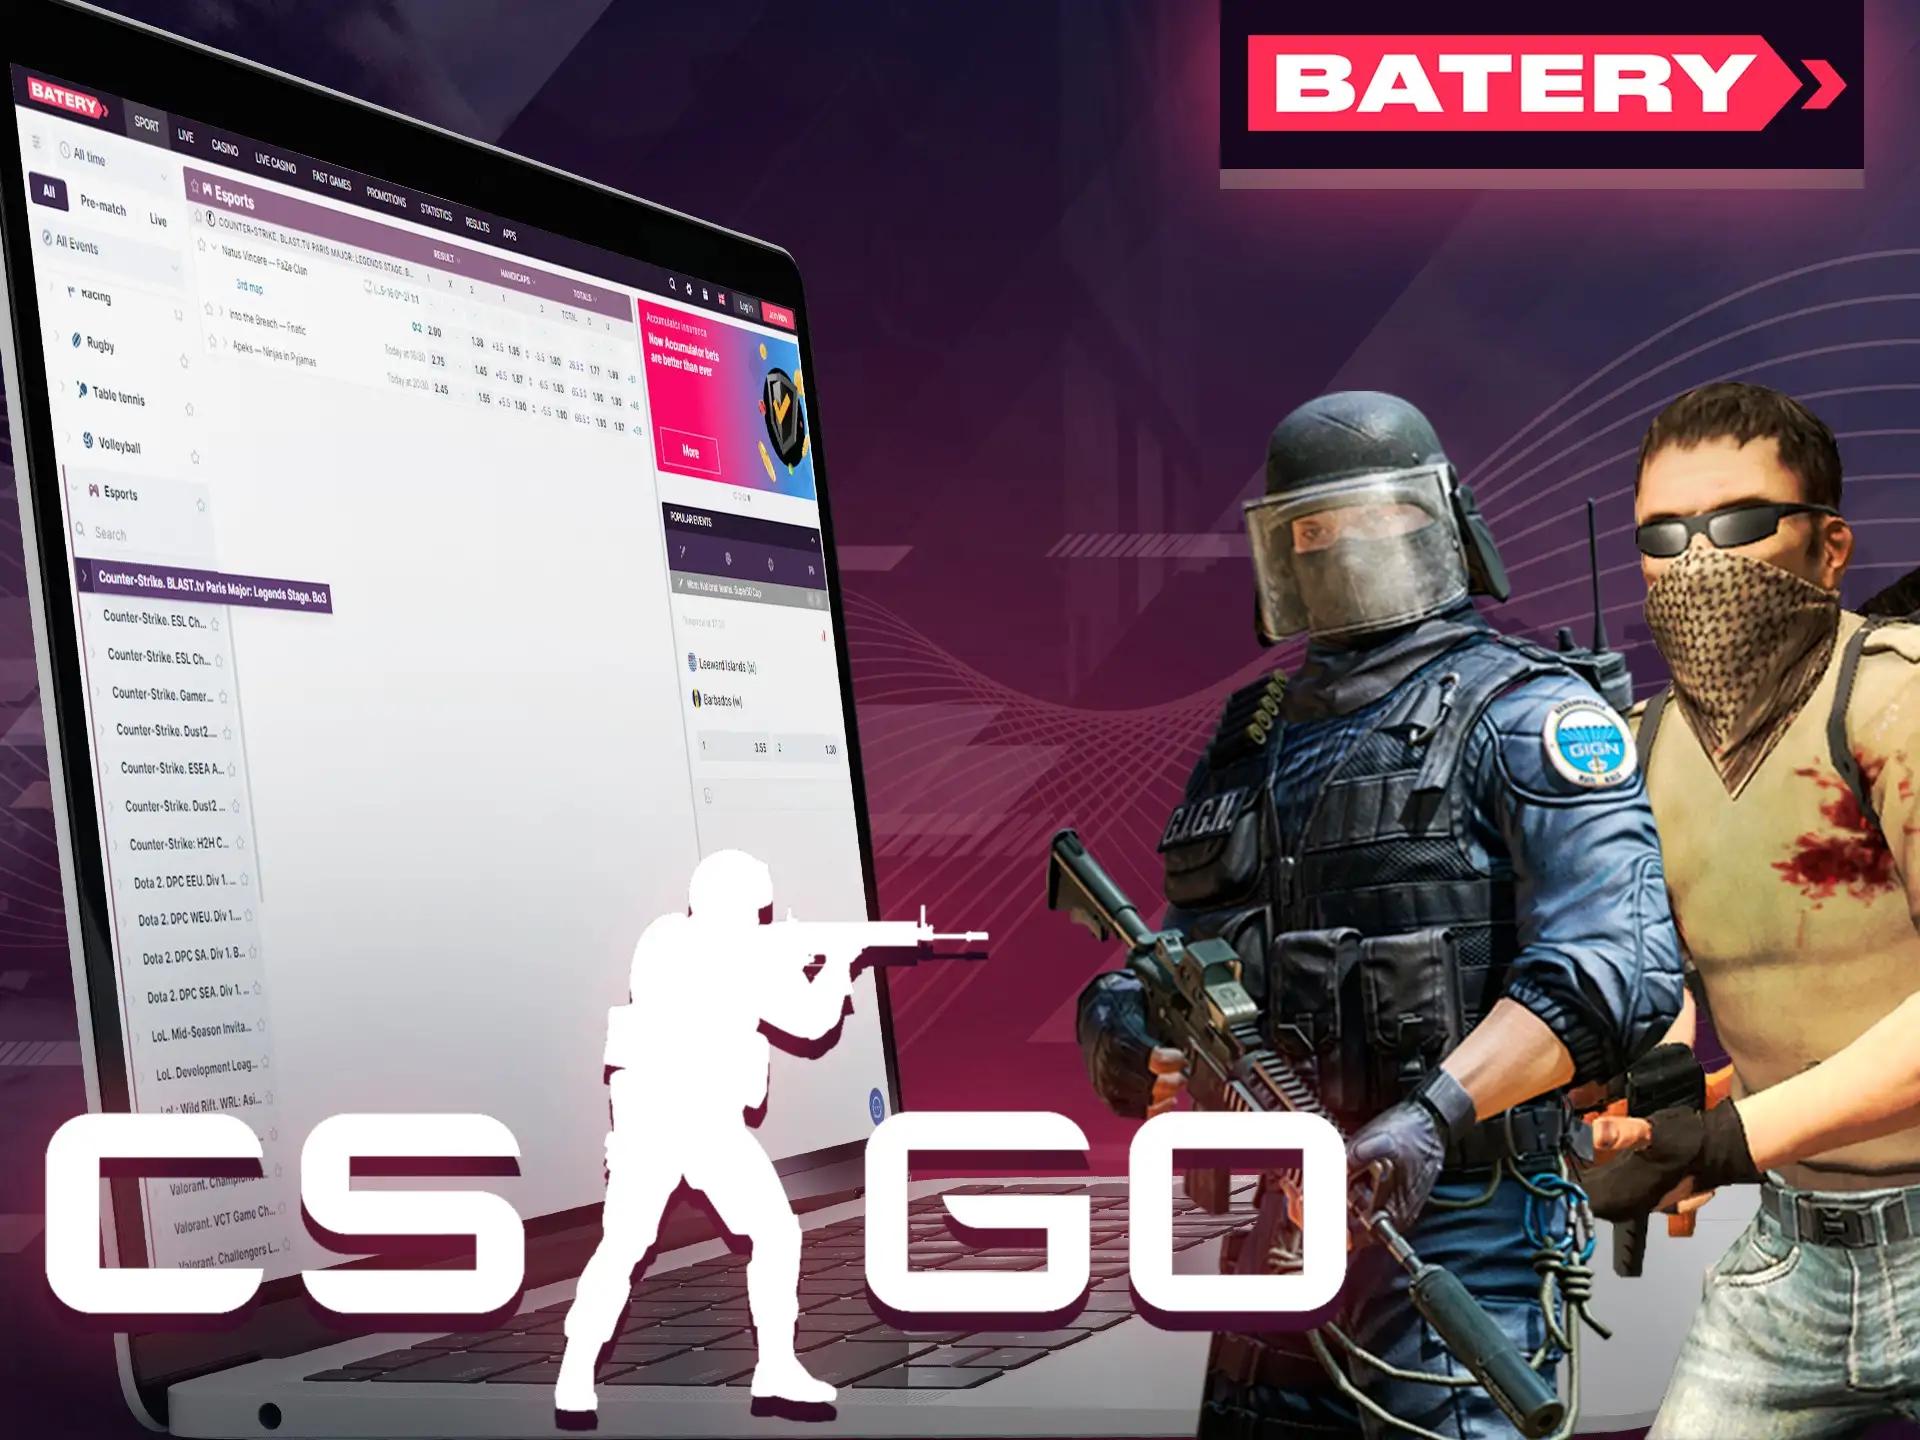 Counter Strike is a great esport to bet on at Batery.